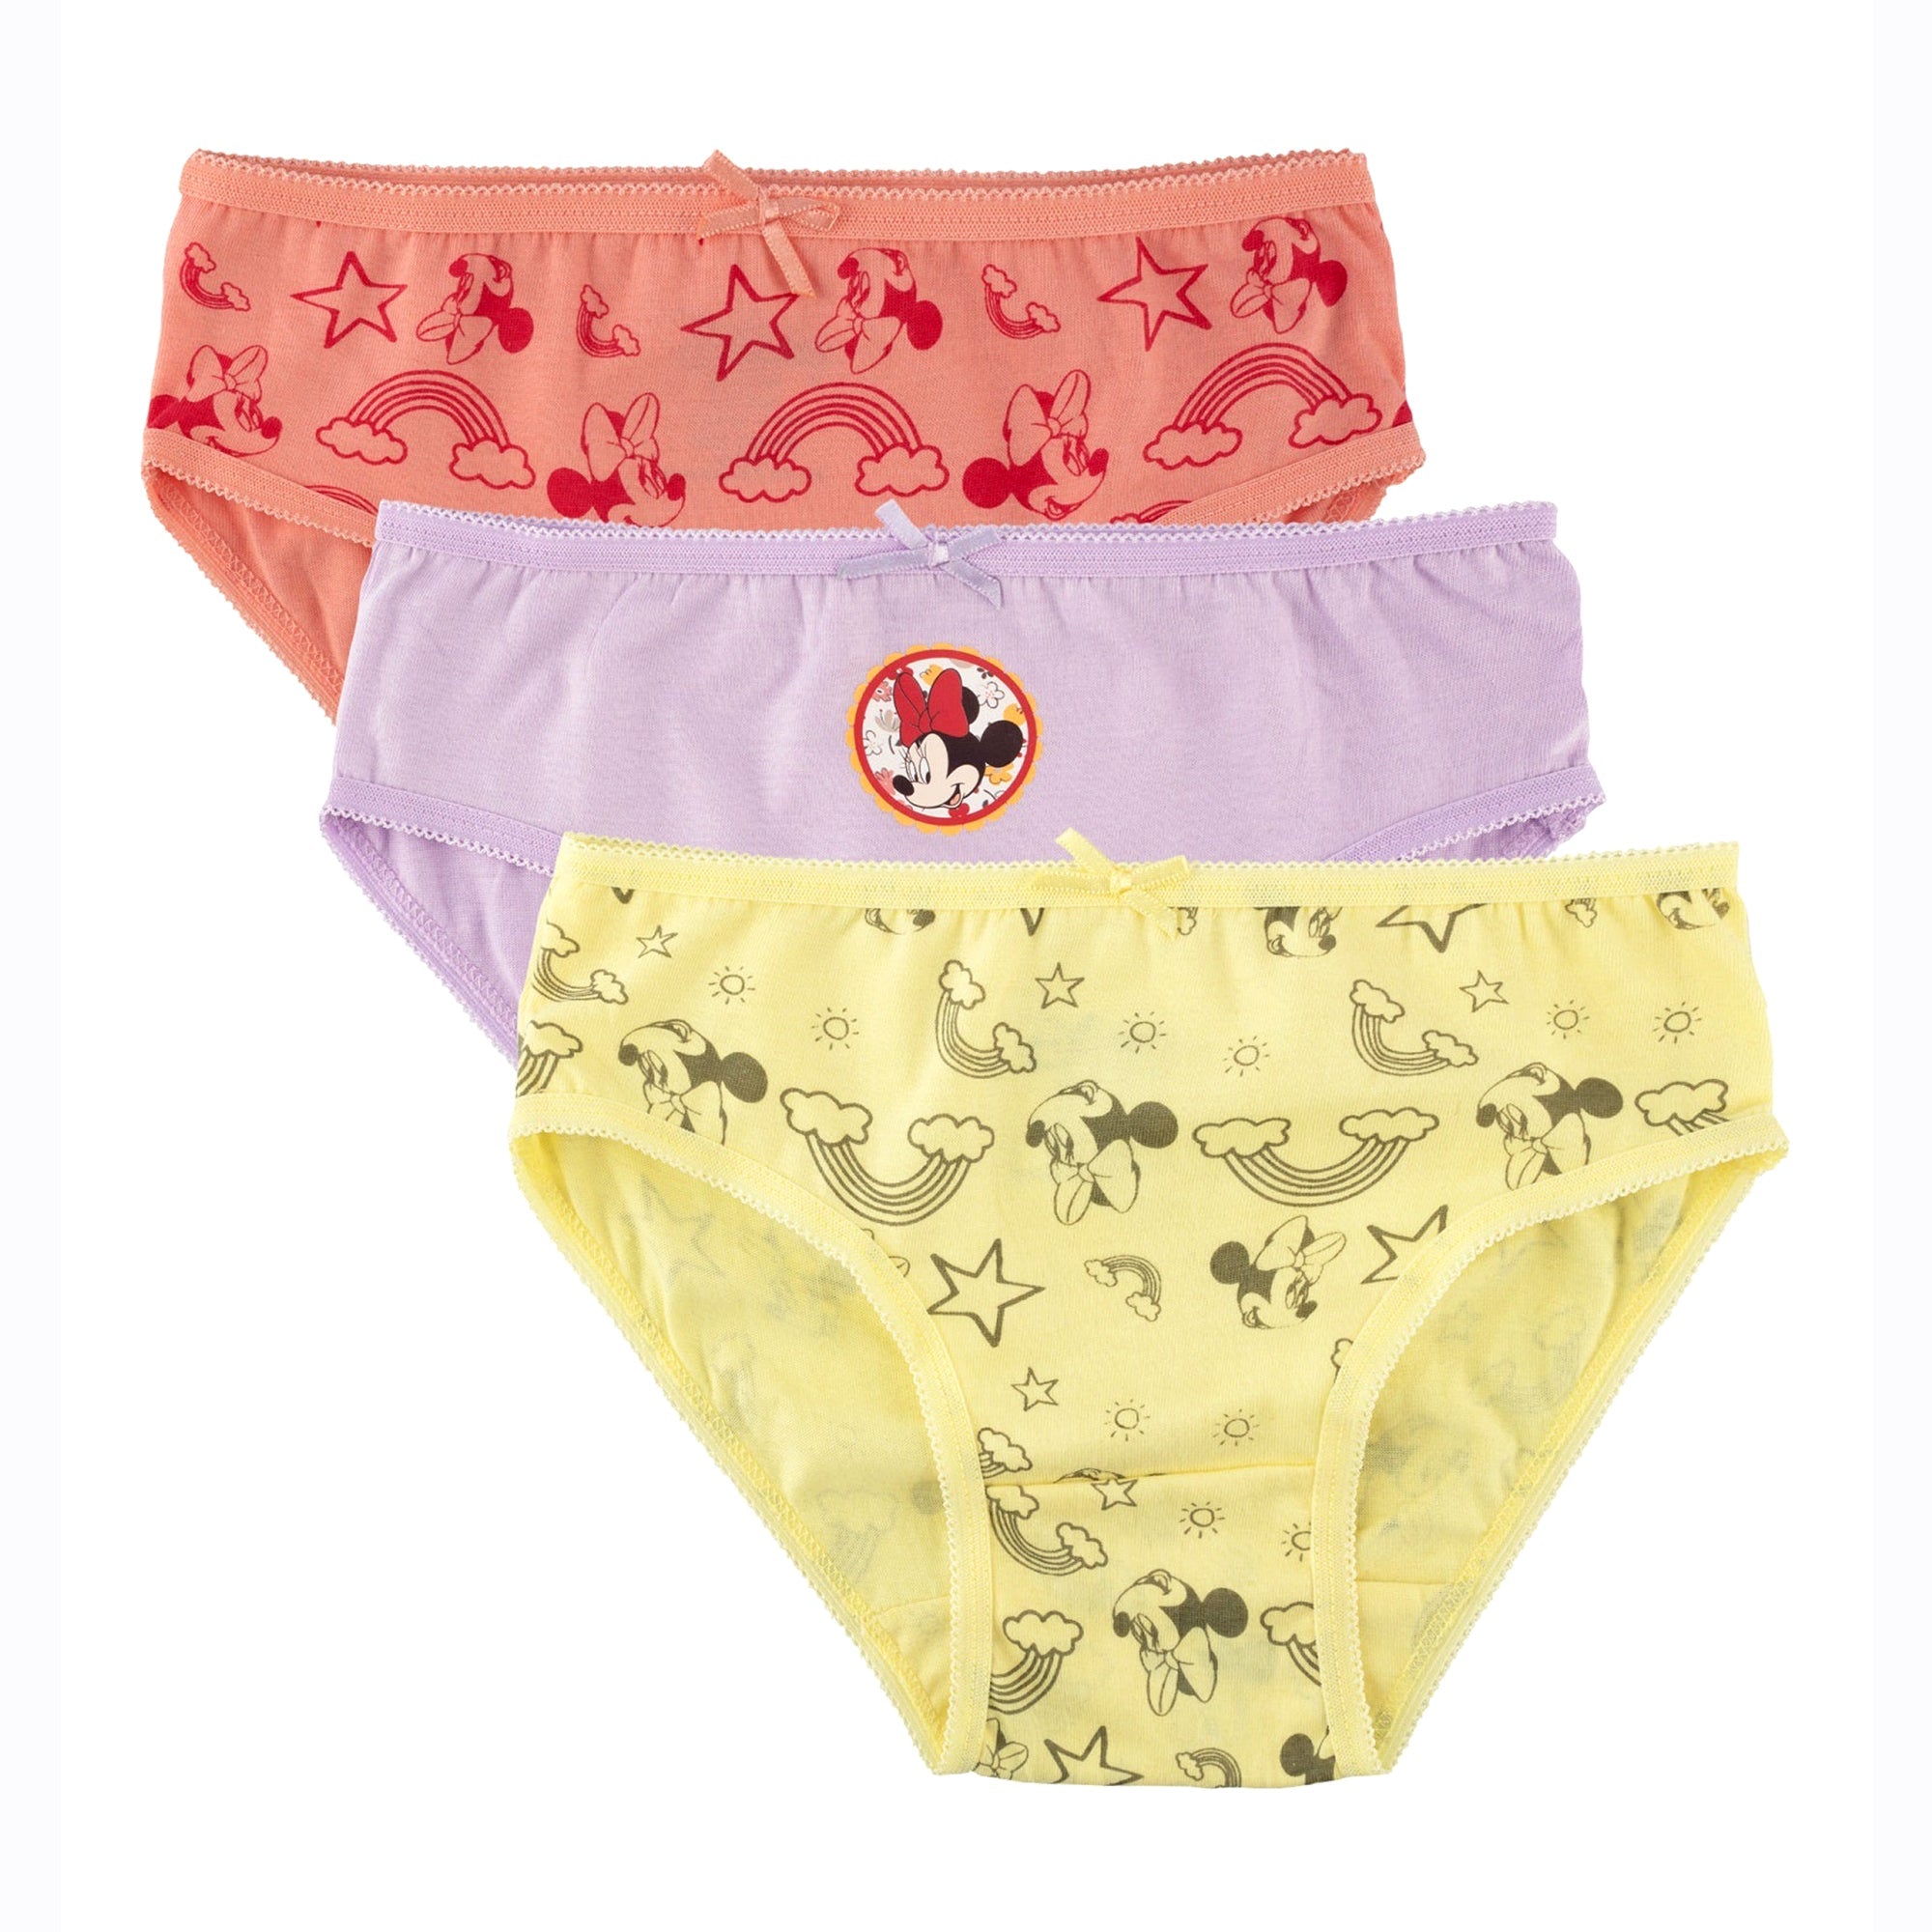 Shop Set of 3 - Minnie Mouse Printed Briefs with Elasticised